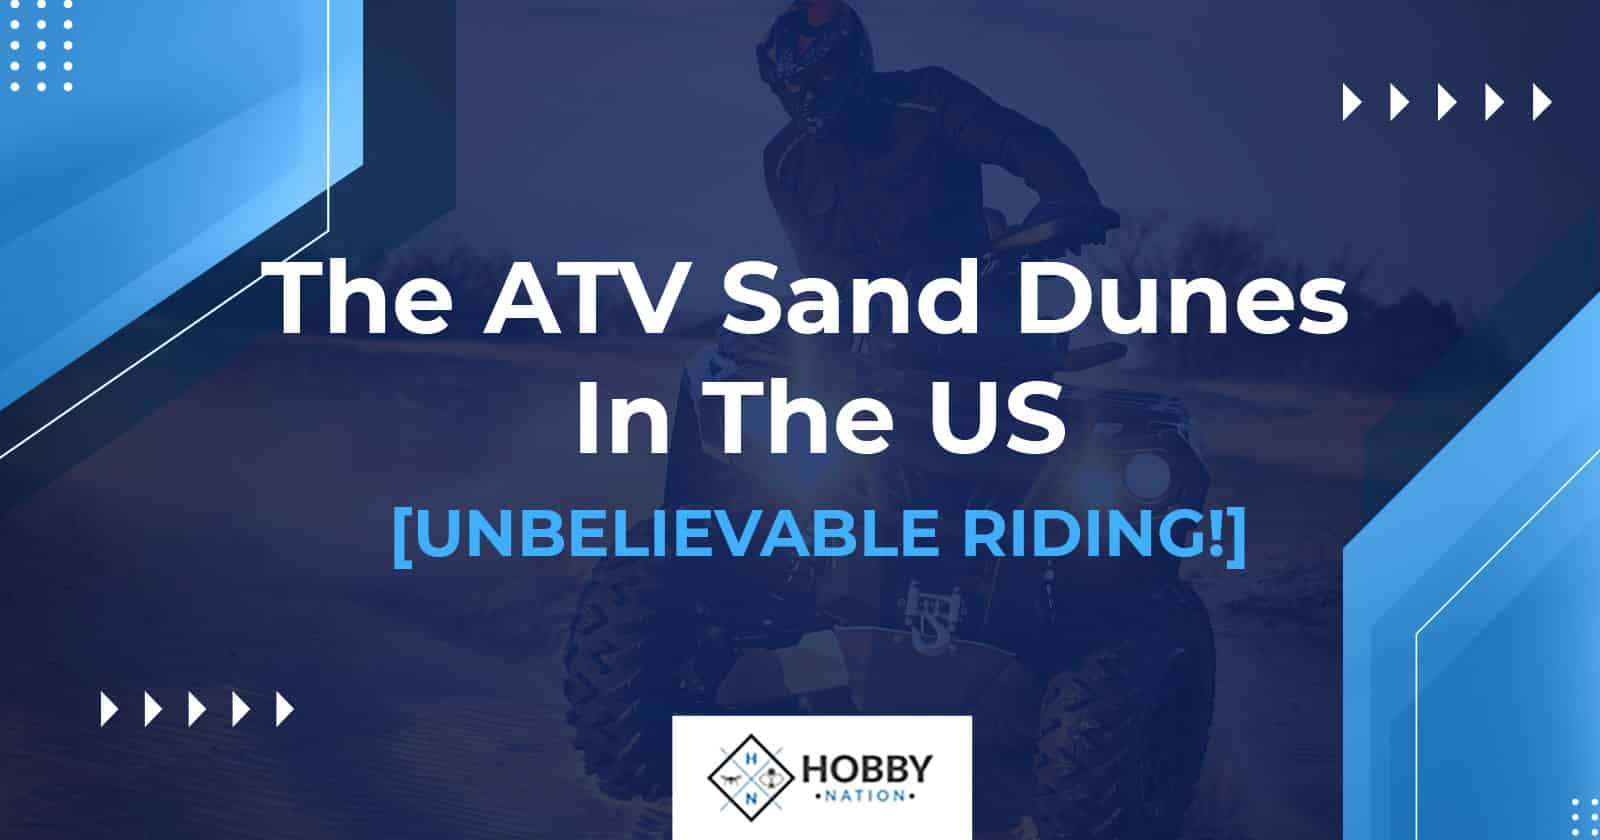 The ATV Sand Dunes In The US [UNBELIEVABLE RIDING!]